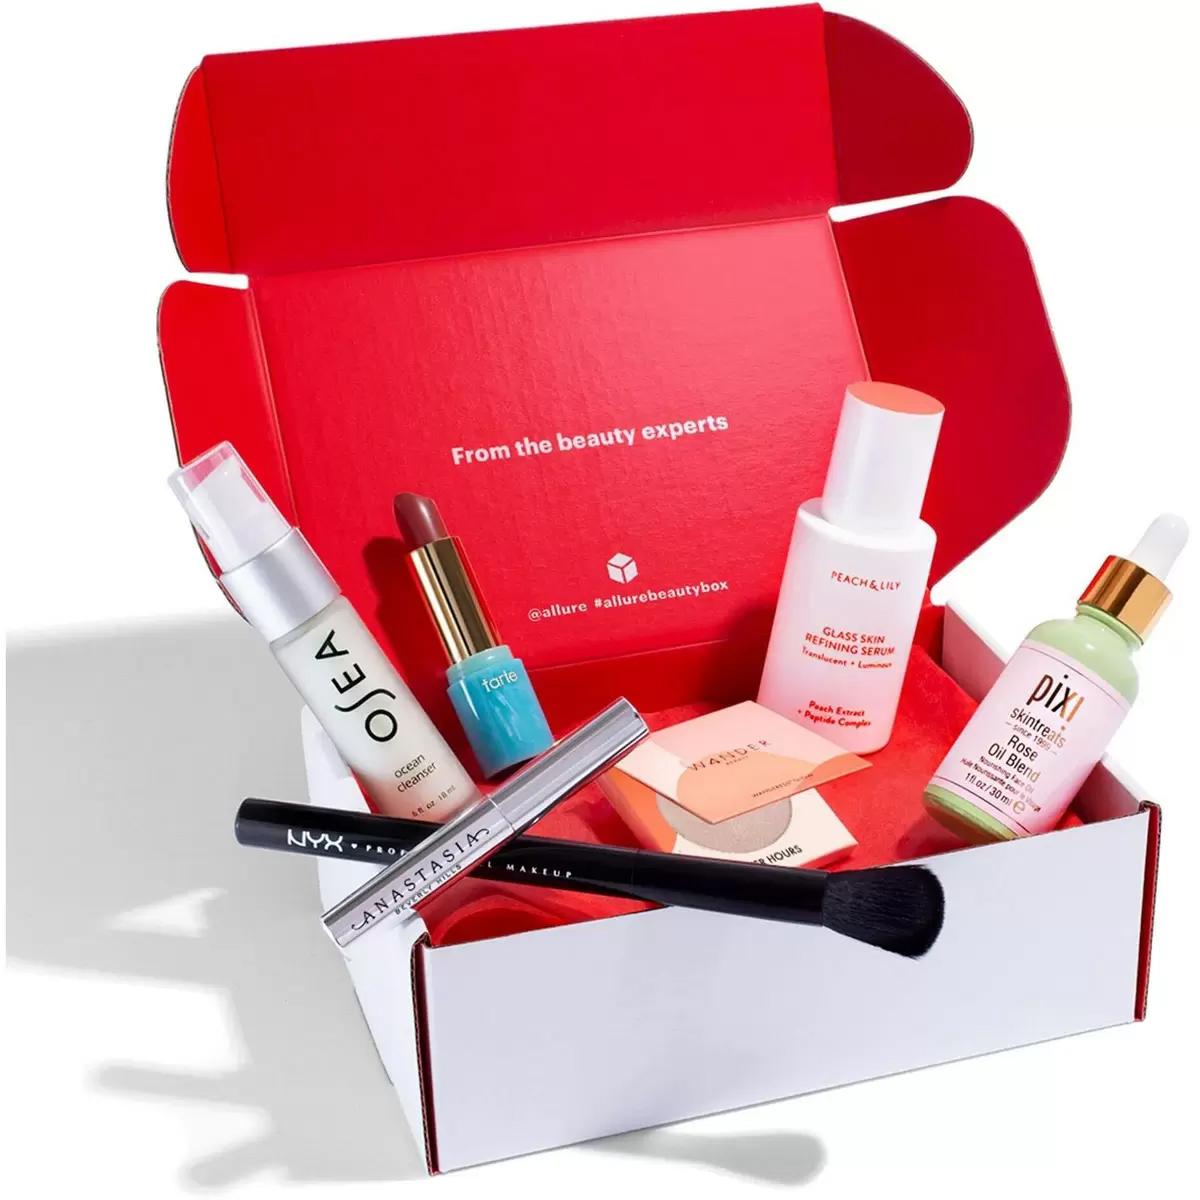 Allure Beauty Box Luxury Beauty and Make Up Subscription Box for $16.10